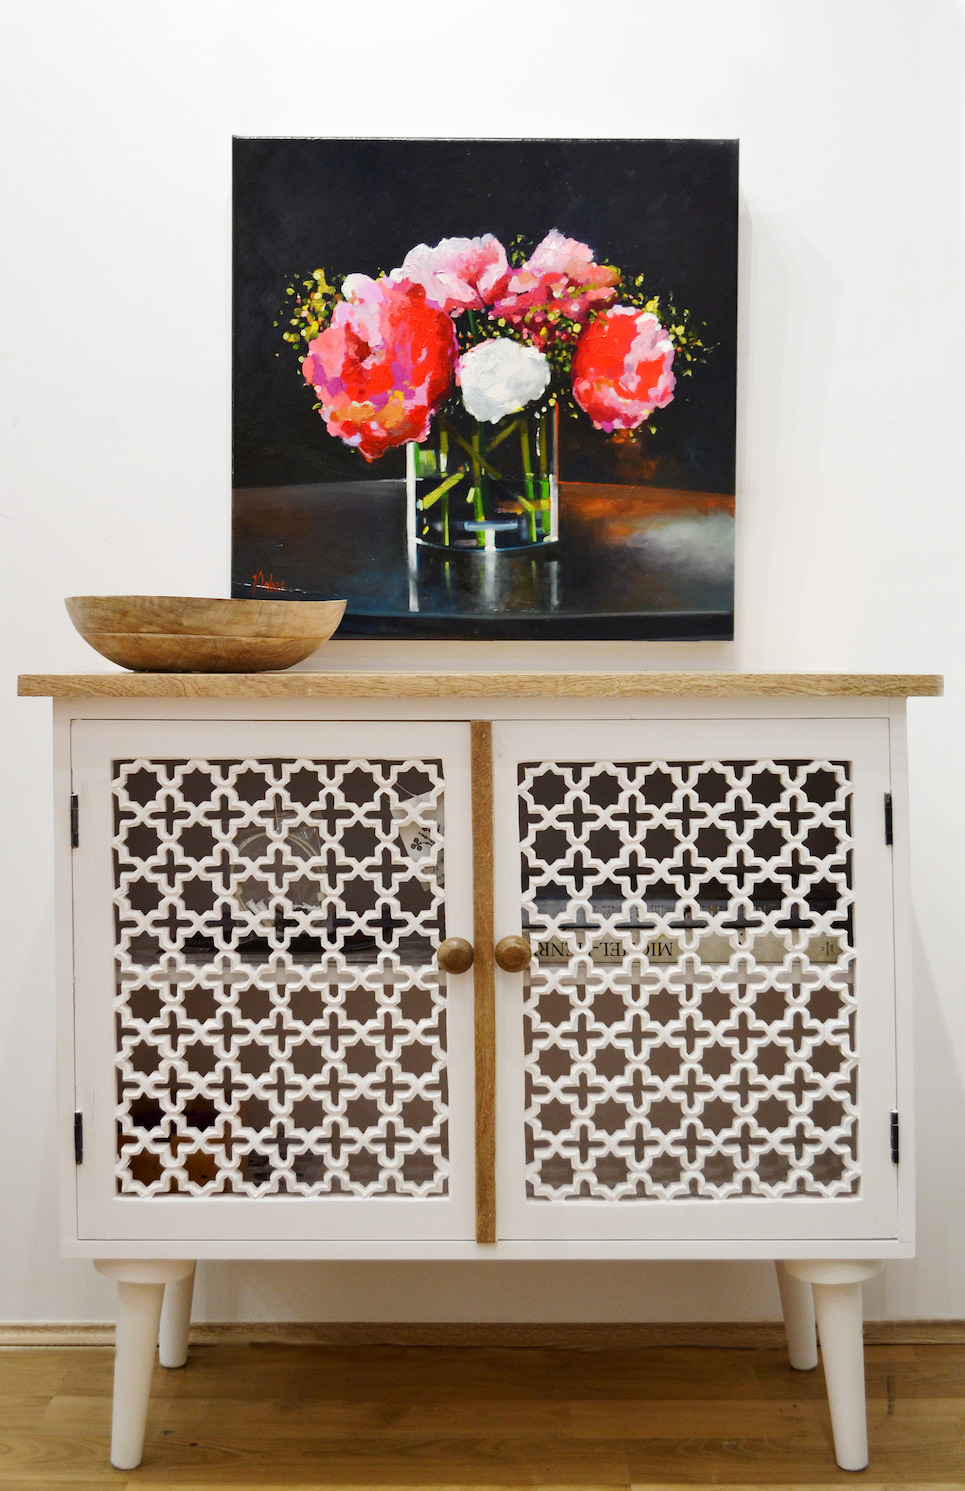 Wall Design Ideas With Still Life Painting "Peonies" By Judith Dalozzo